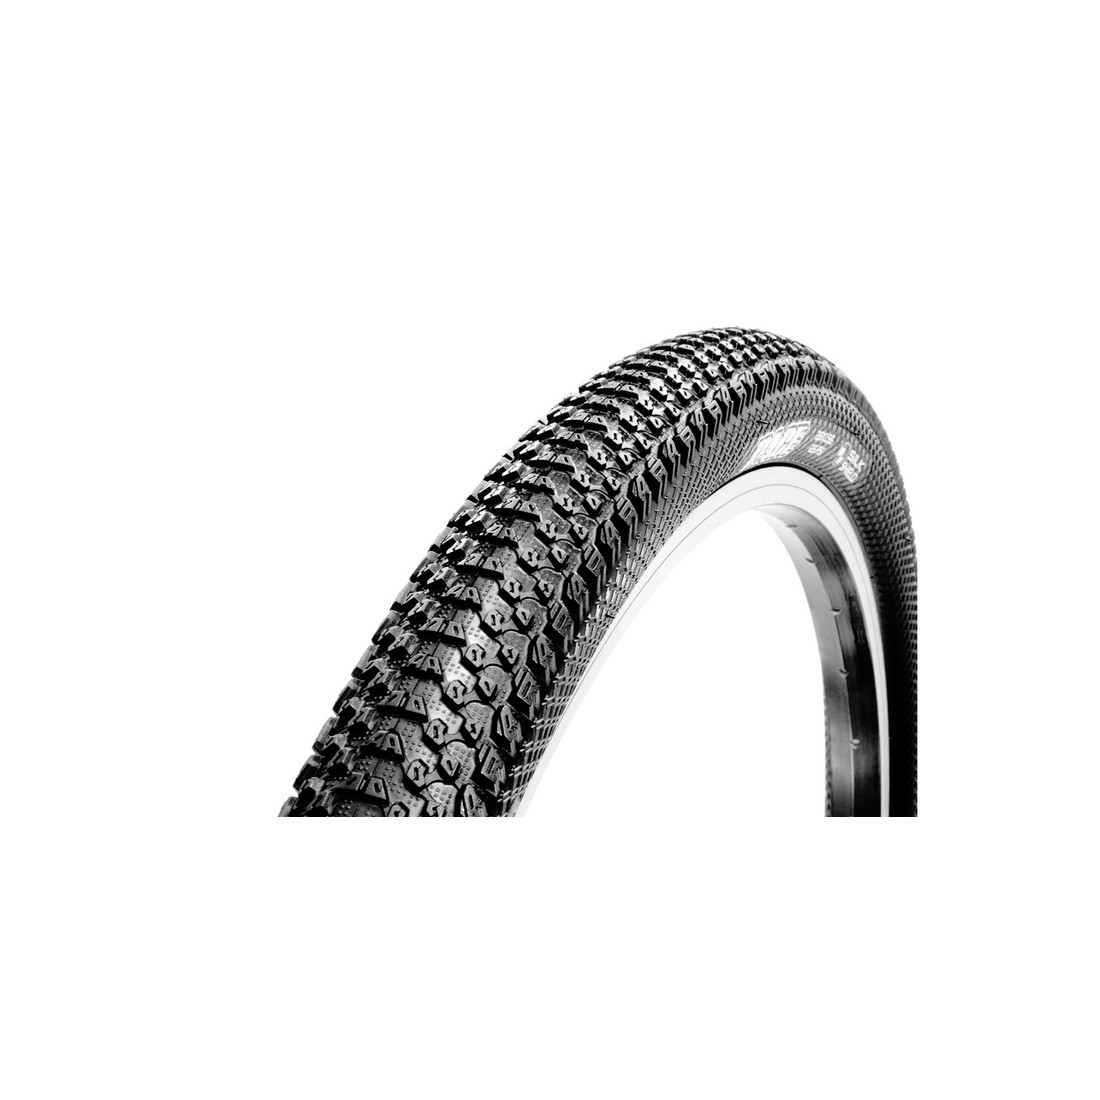 52 10 26. Maxxis Pace 26x2.10. Maxxis Pace 29x2.10 52-622 60tpi Foldable. Максис 26.2.10. Maxxis 29x2.10 белый корт.